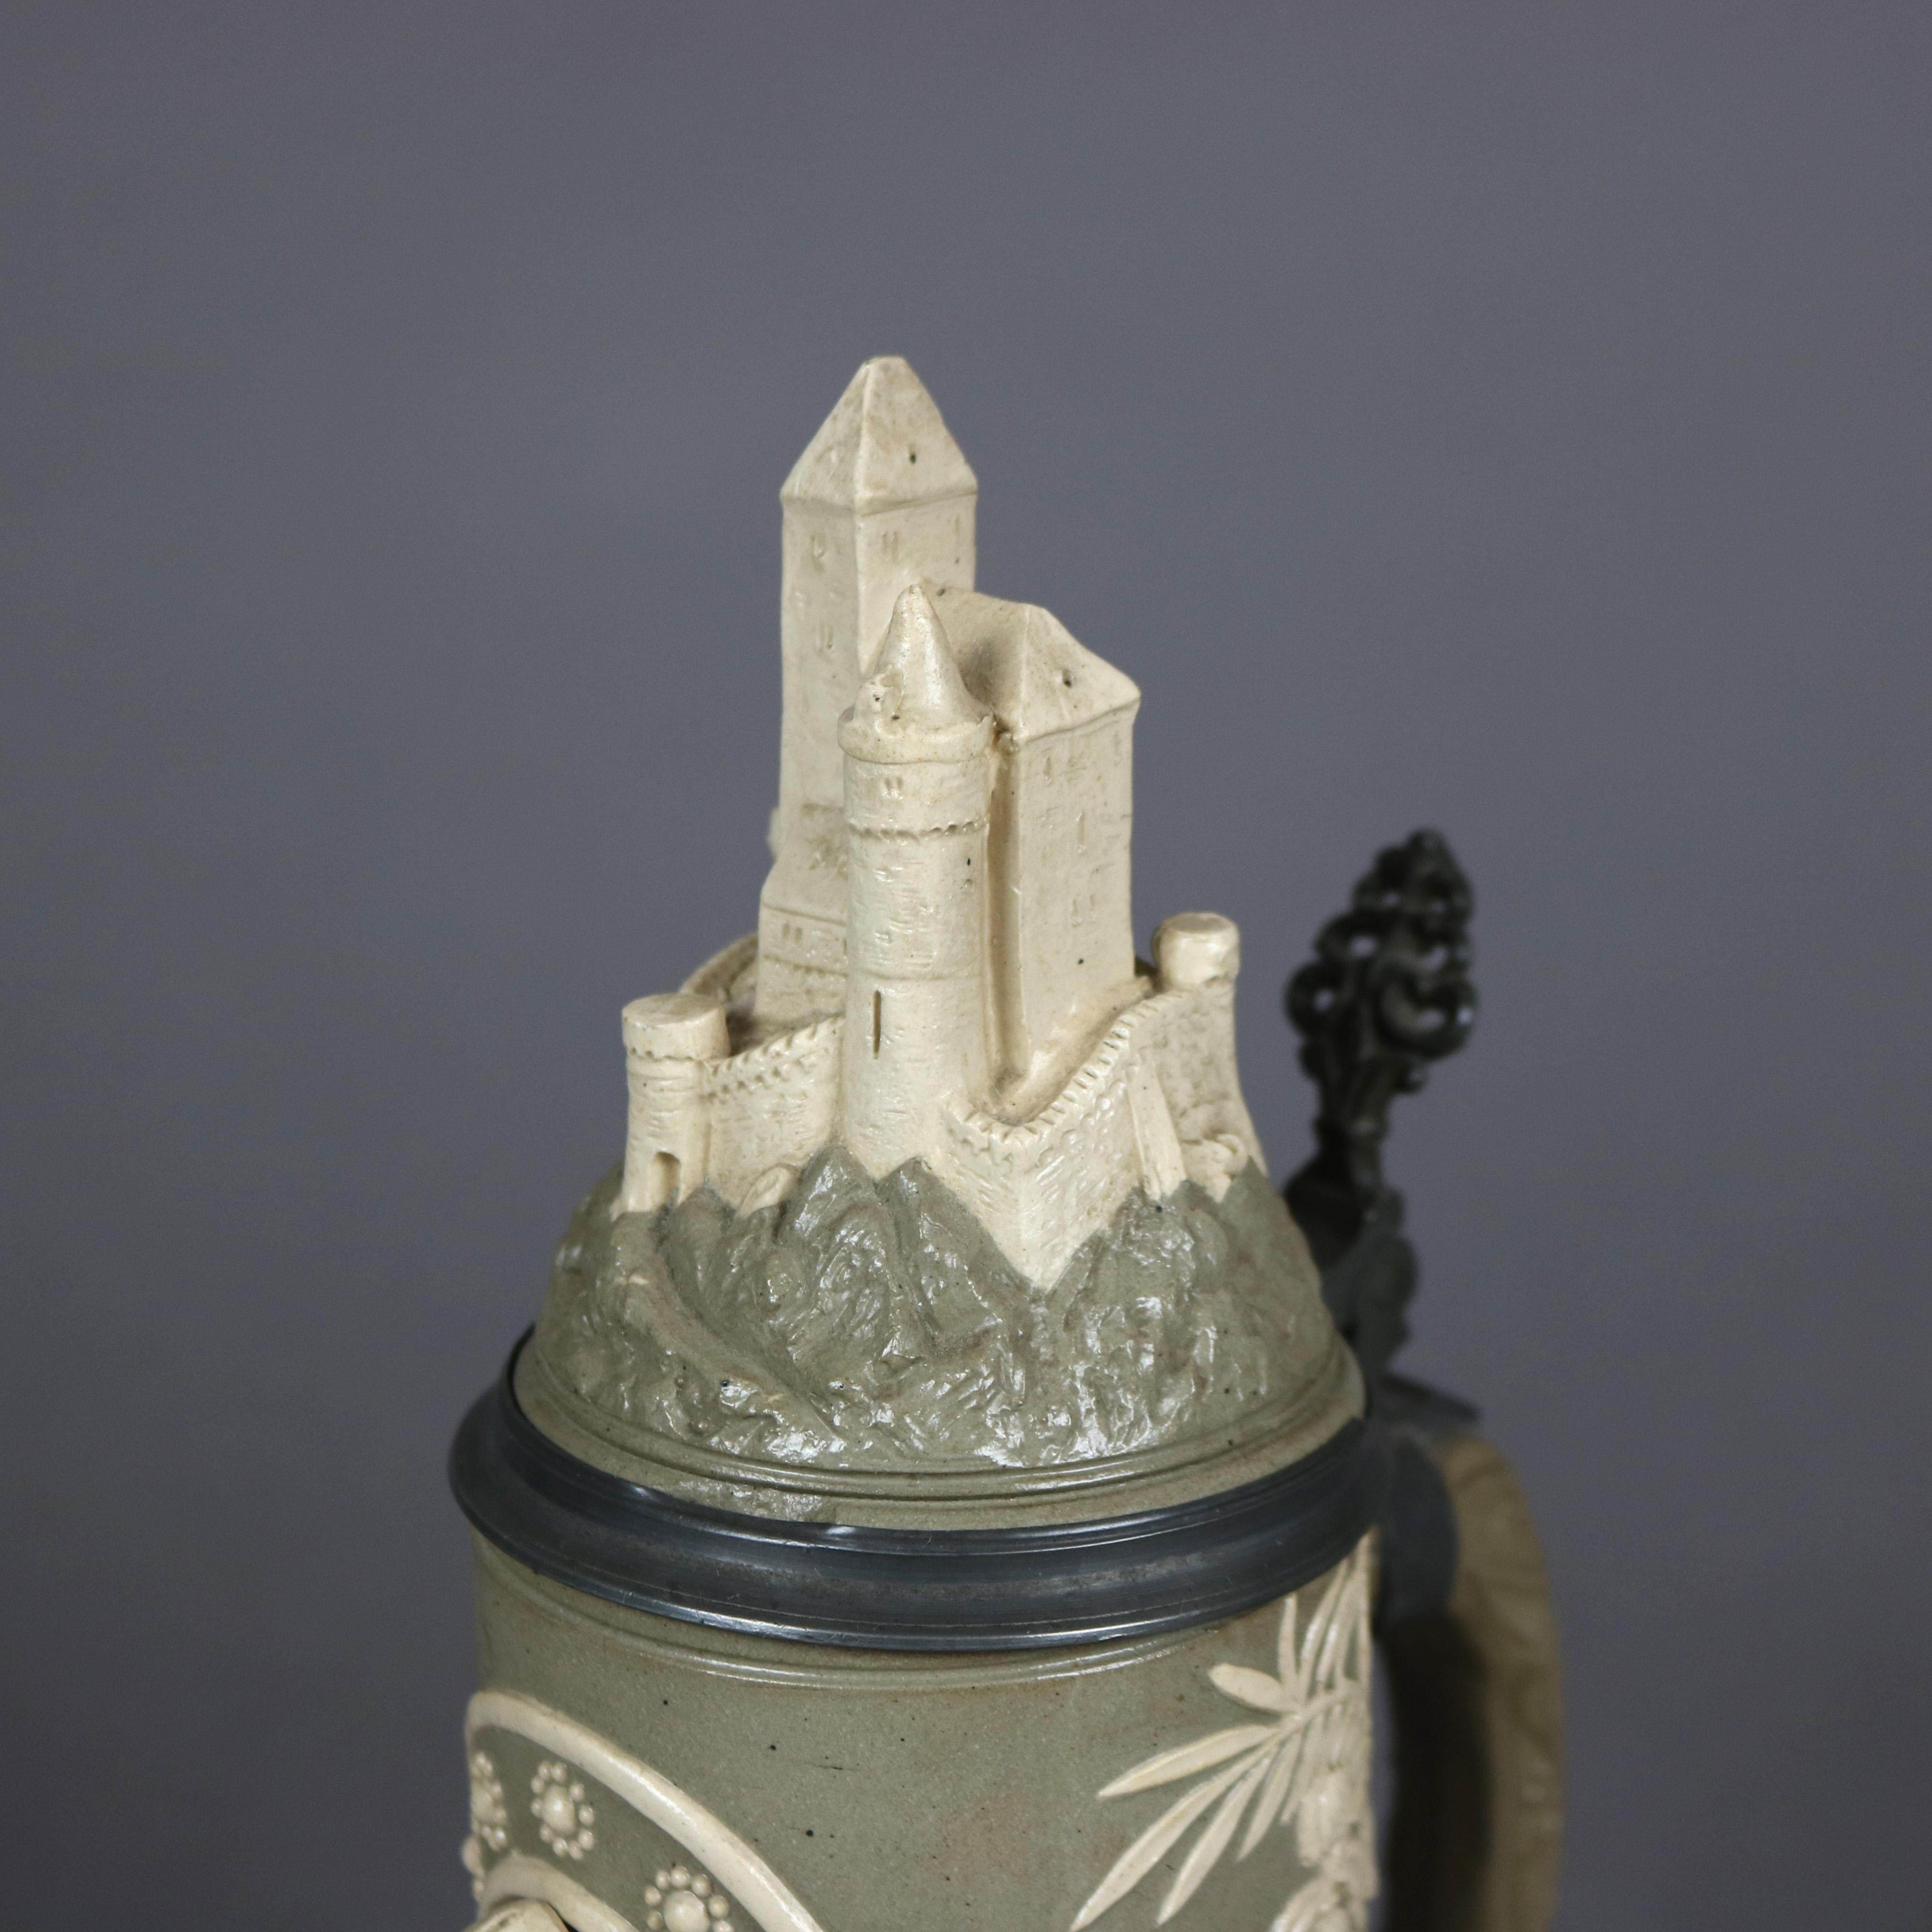 Pottery Antique Large German Stoneware Stein, Castle & Knight Figure in Relief, c1900